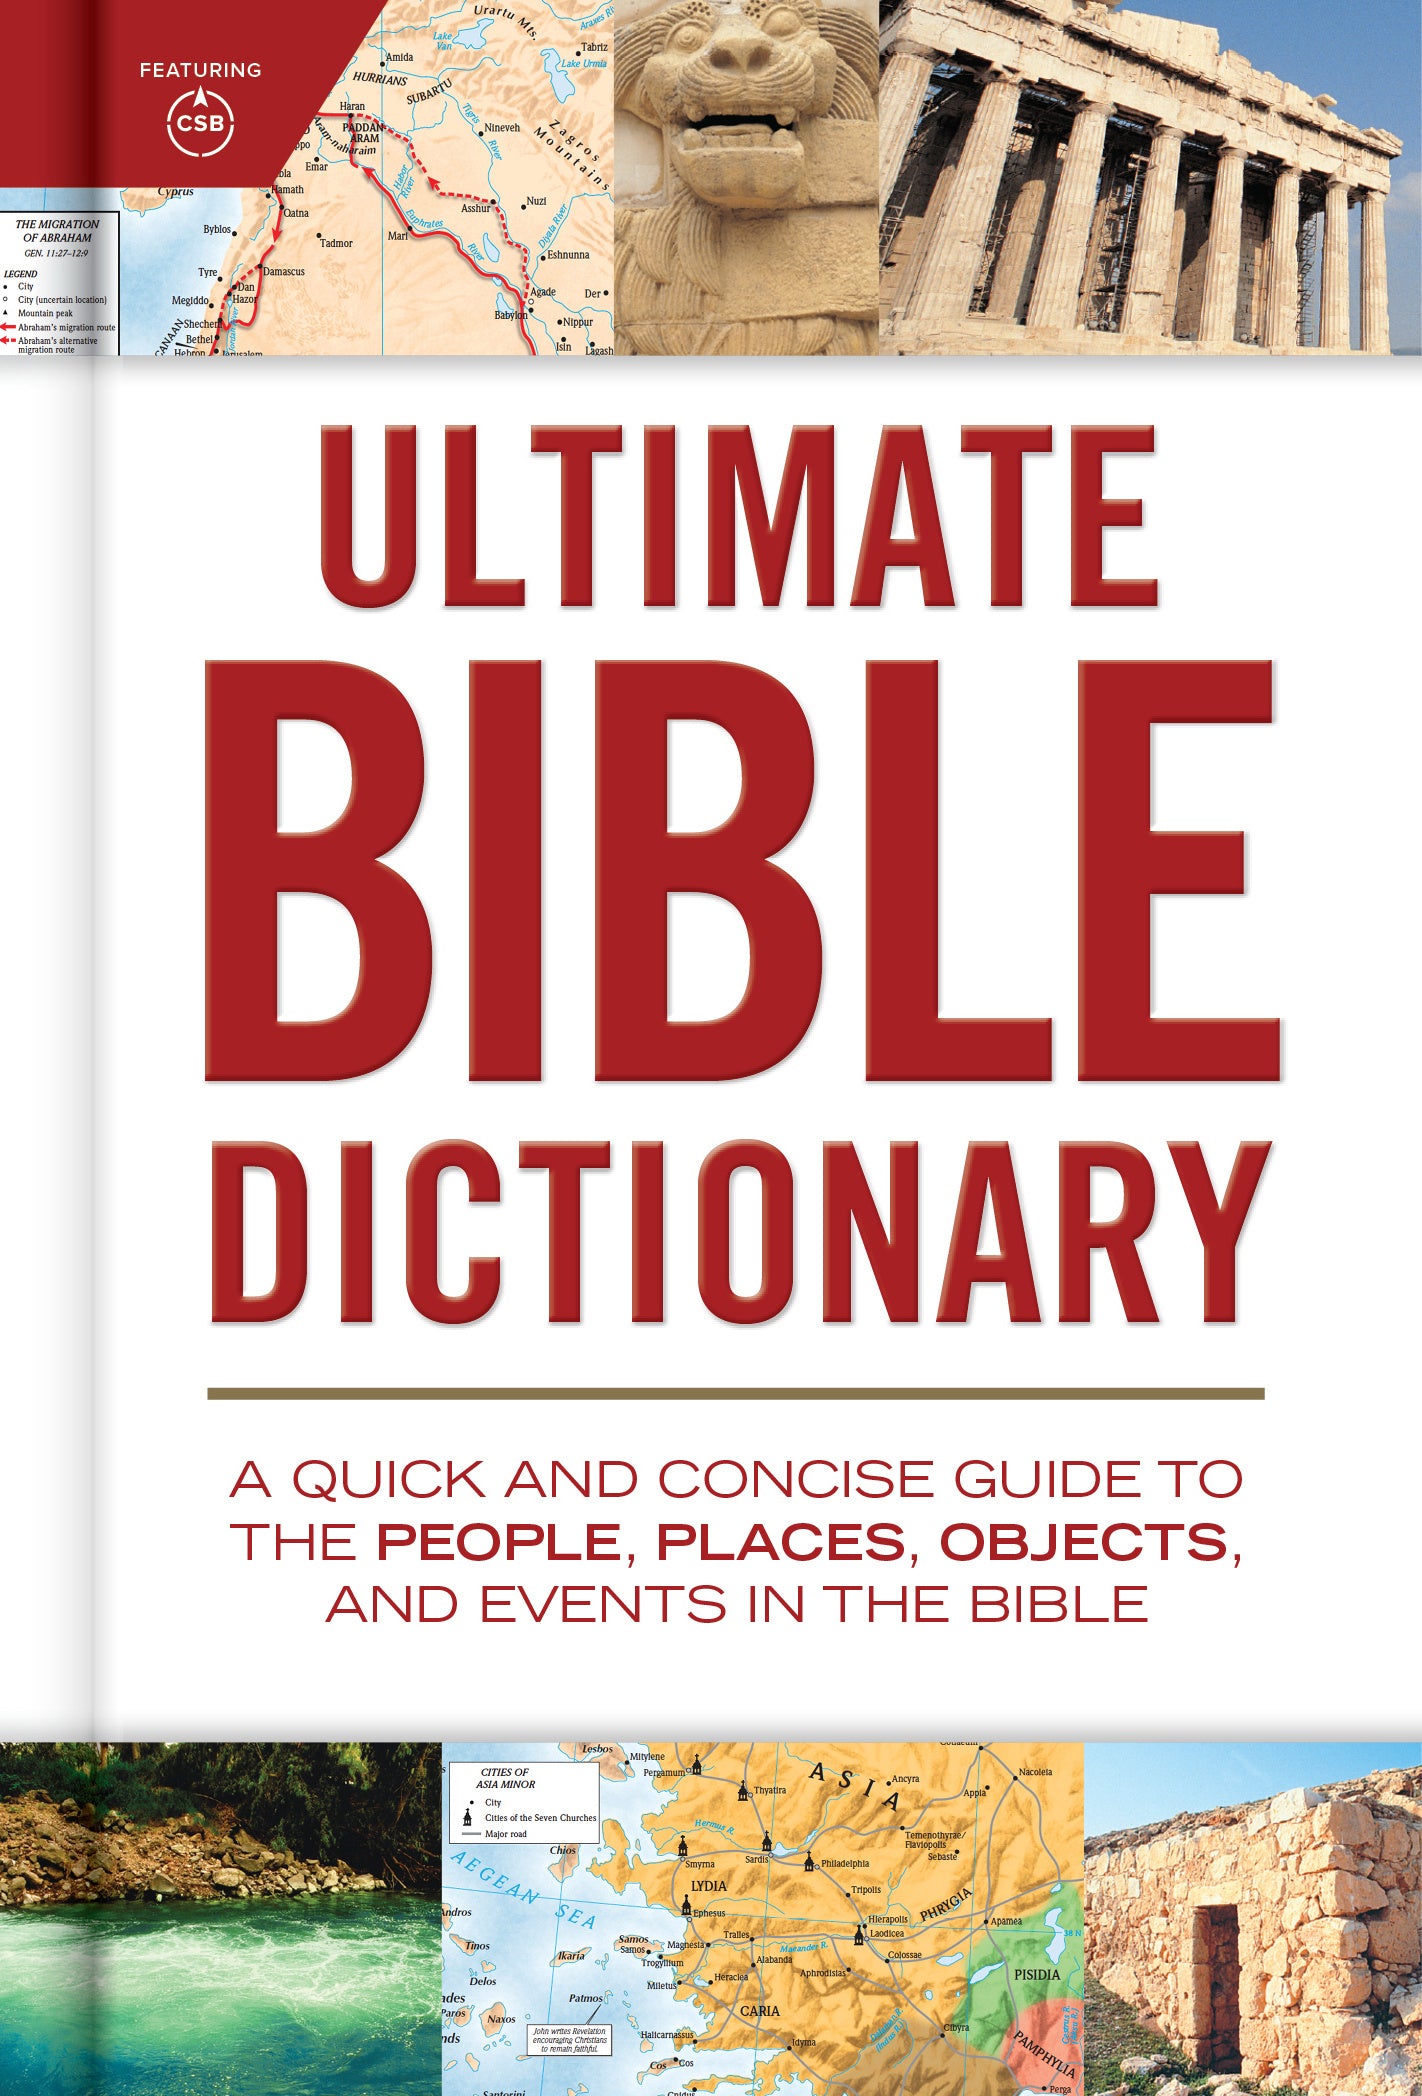 Image of Ultimate Bible Dictionary other